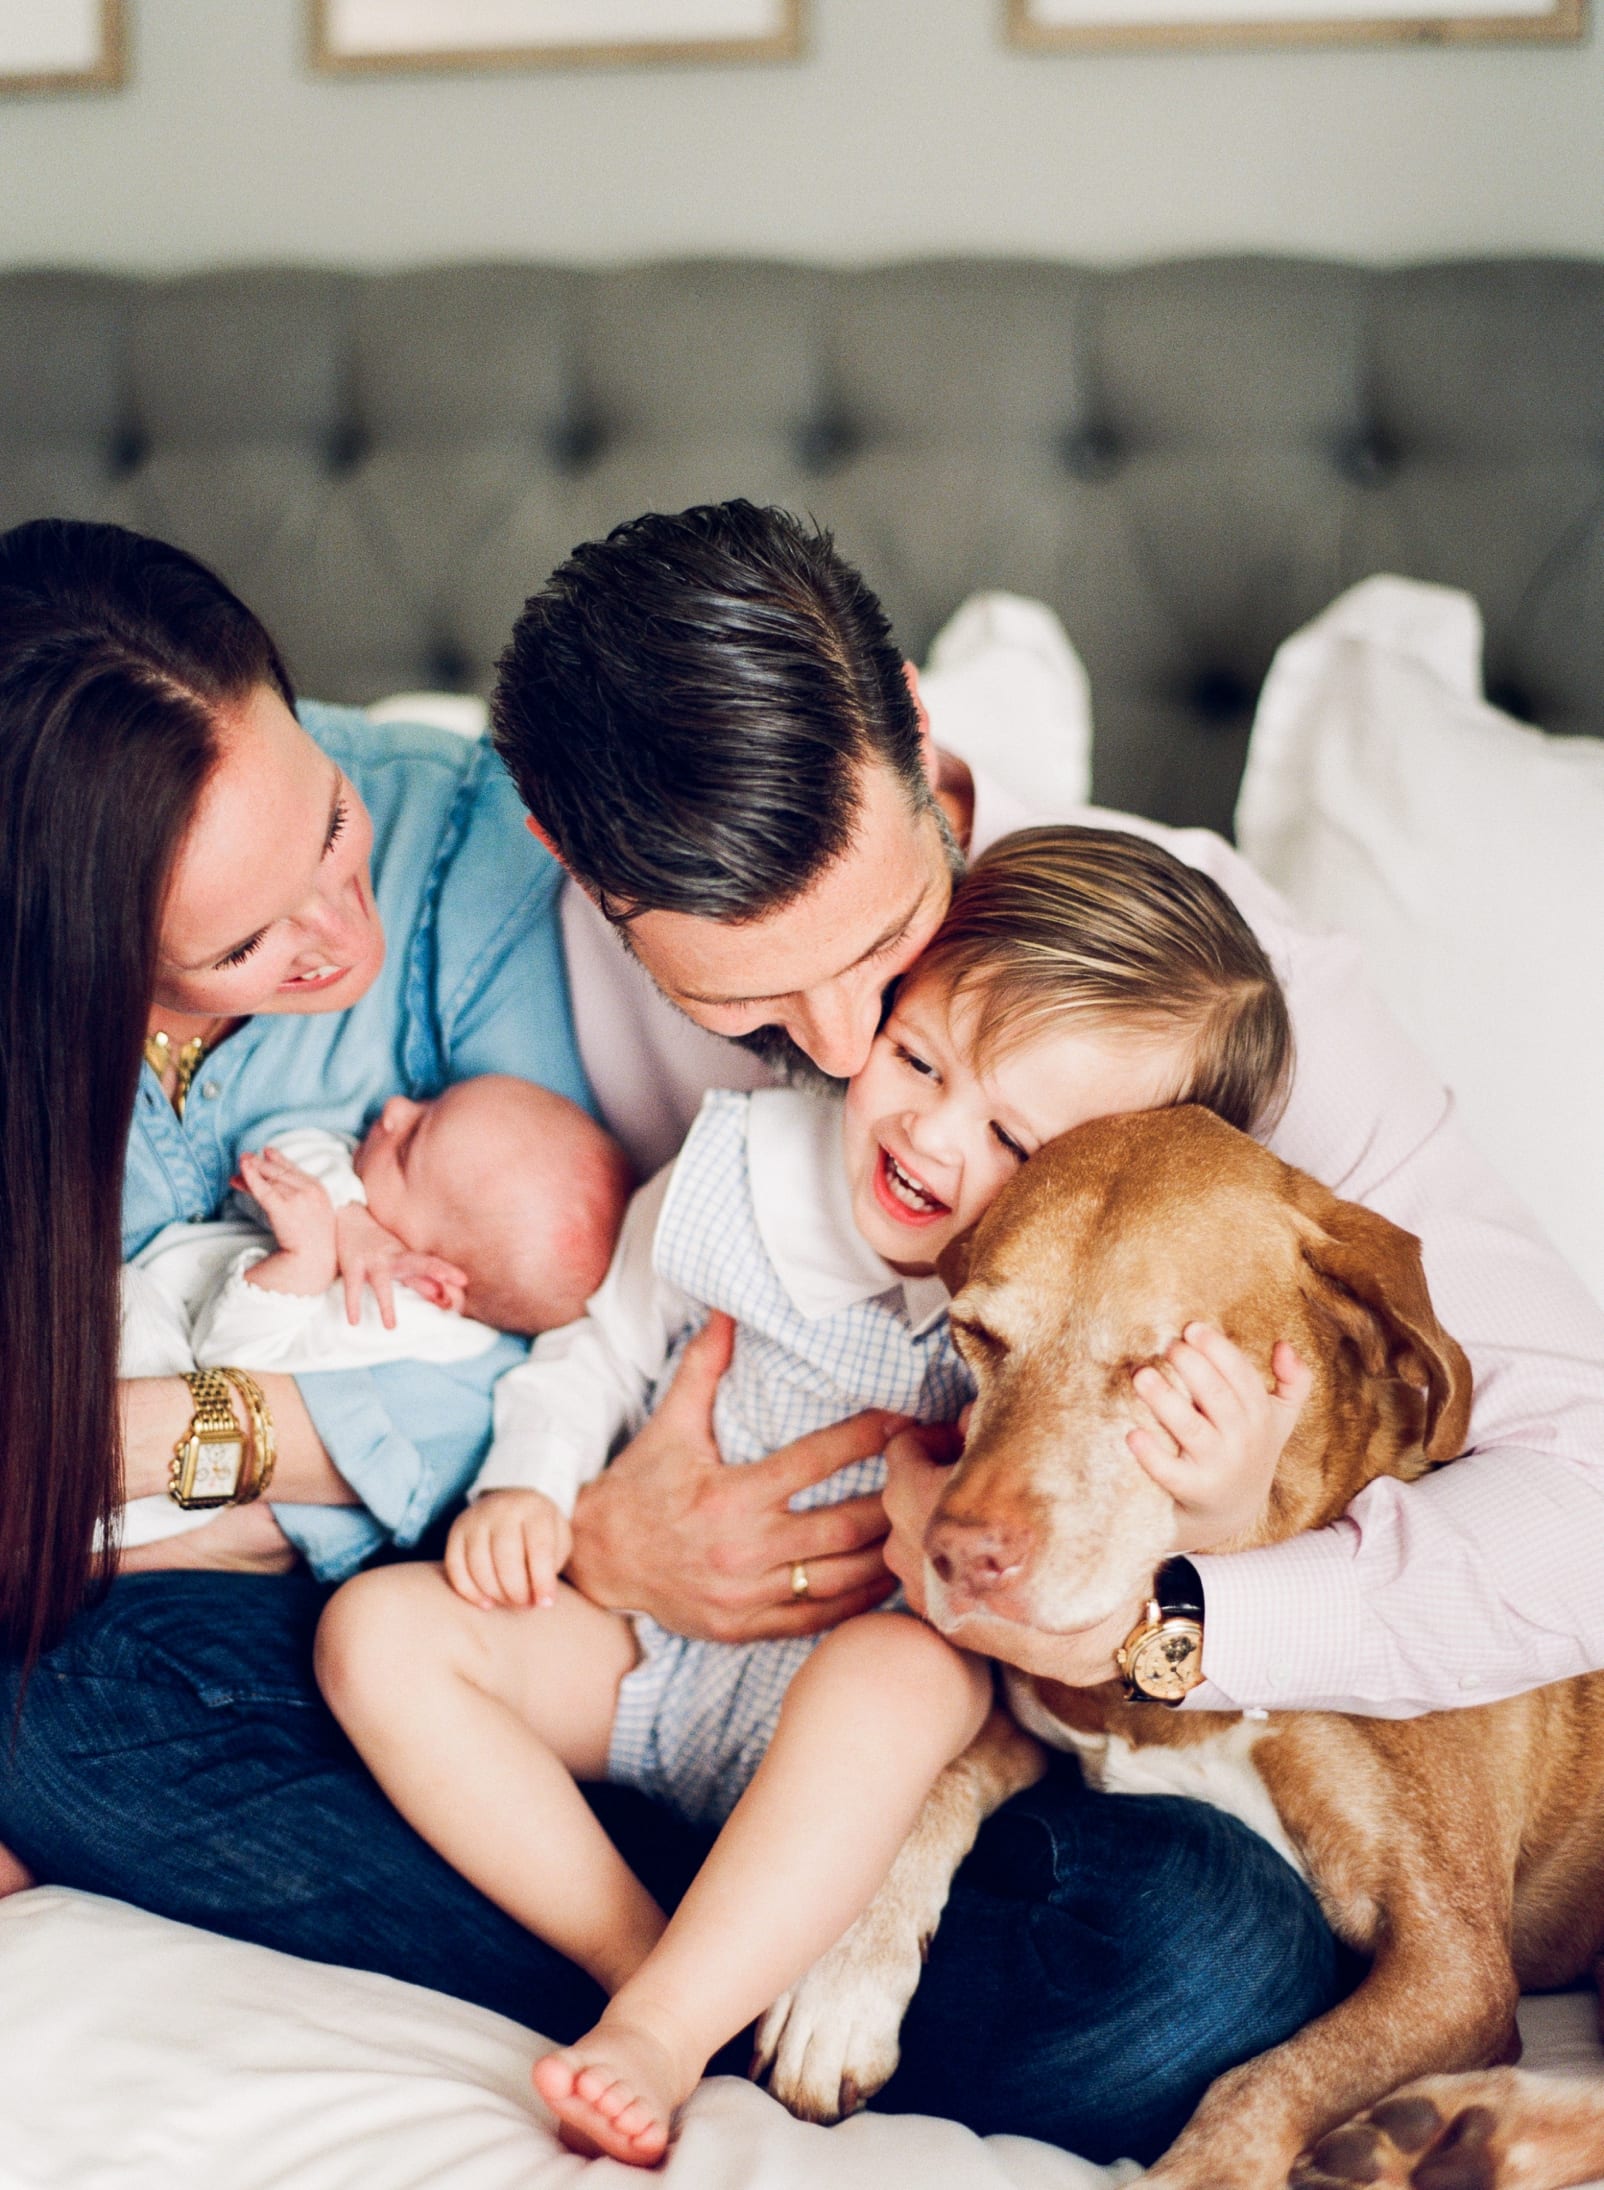 Apex, NC whole family snuggled on bed with dog for newborn session photo